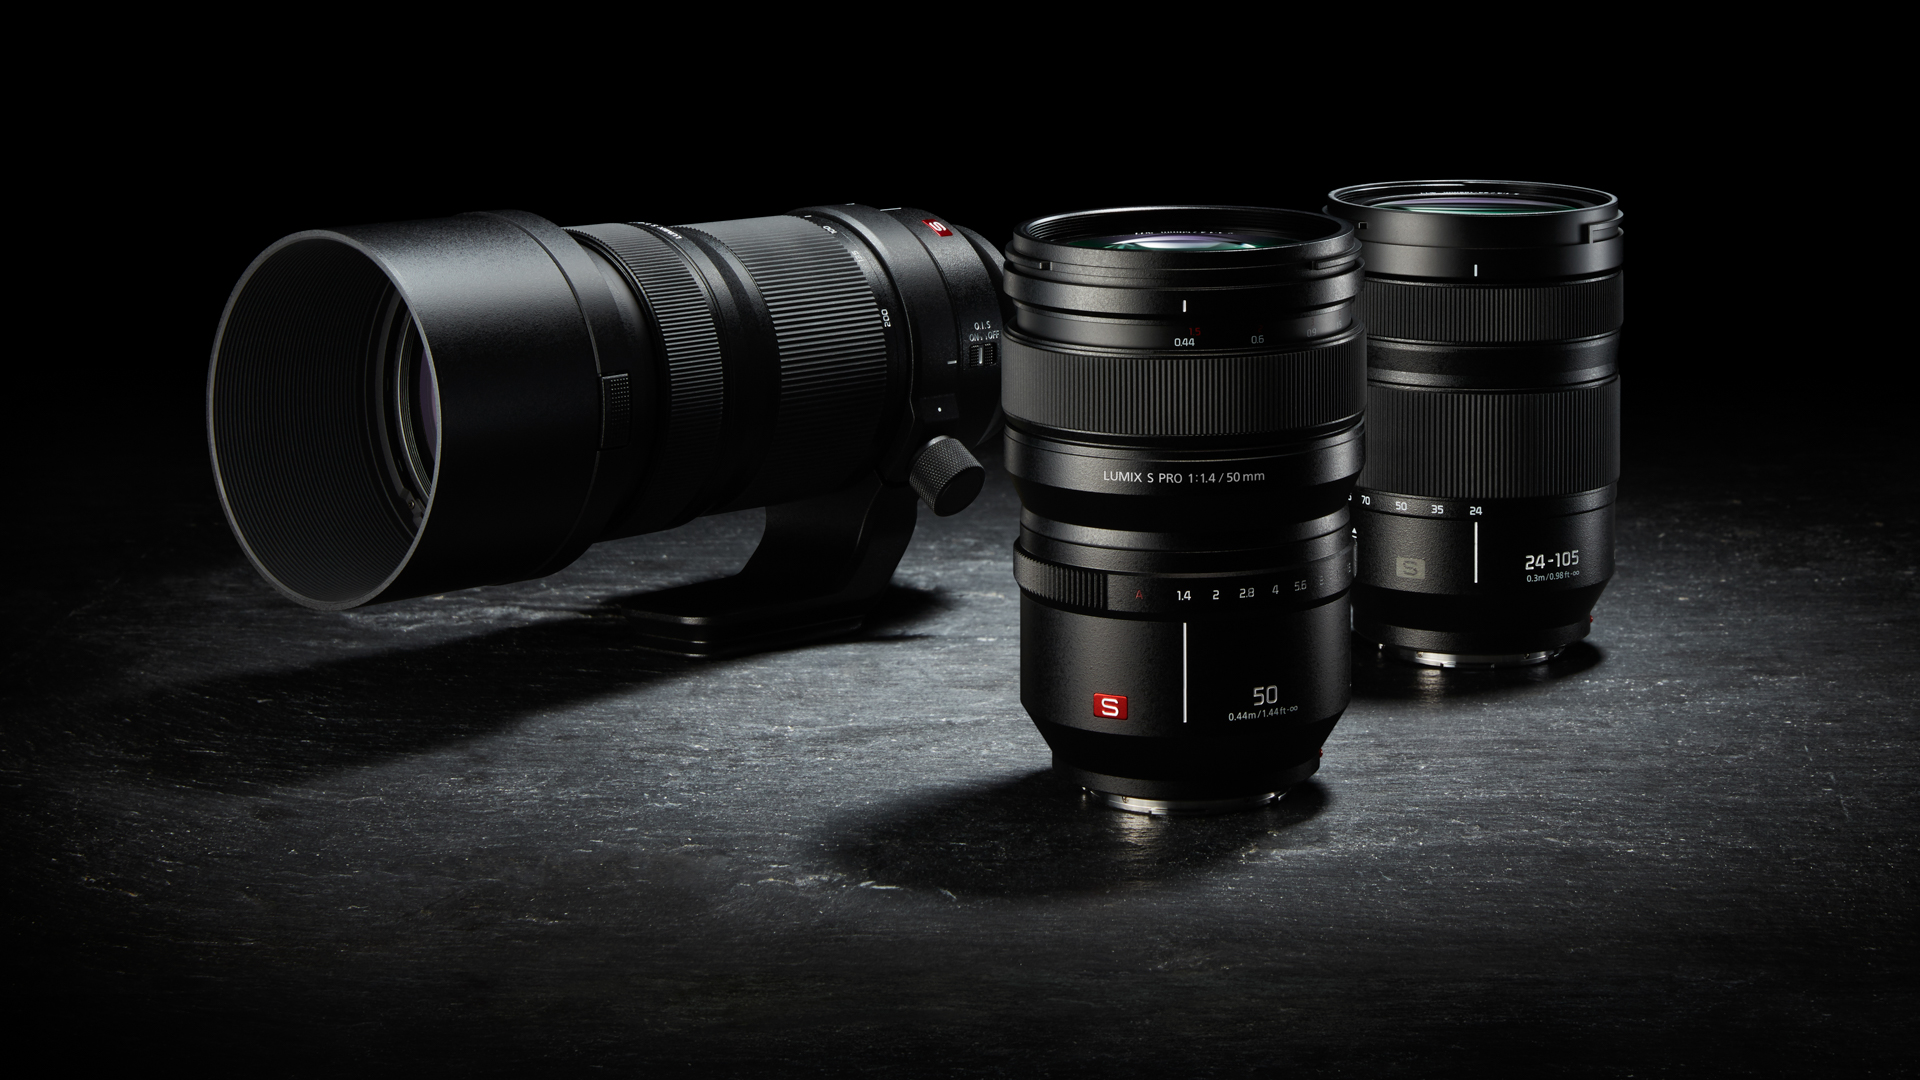 Panasonic confirms S series lens triplet for Lumix S1R and S1